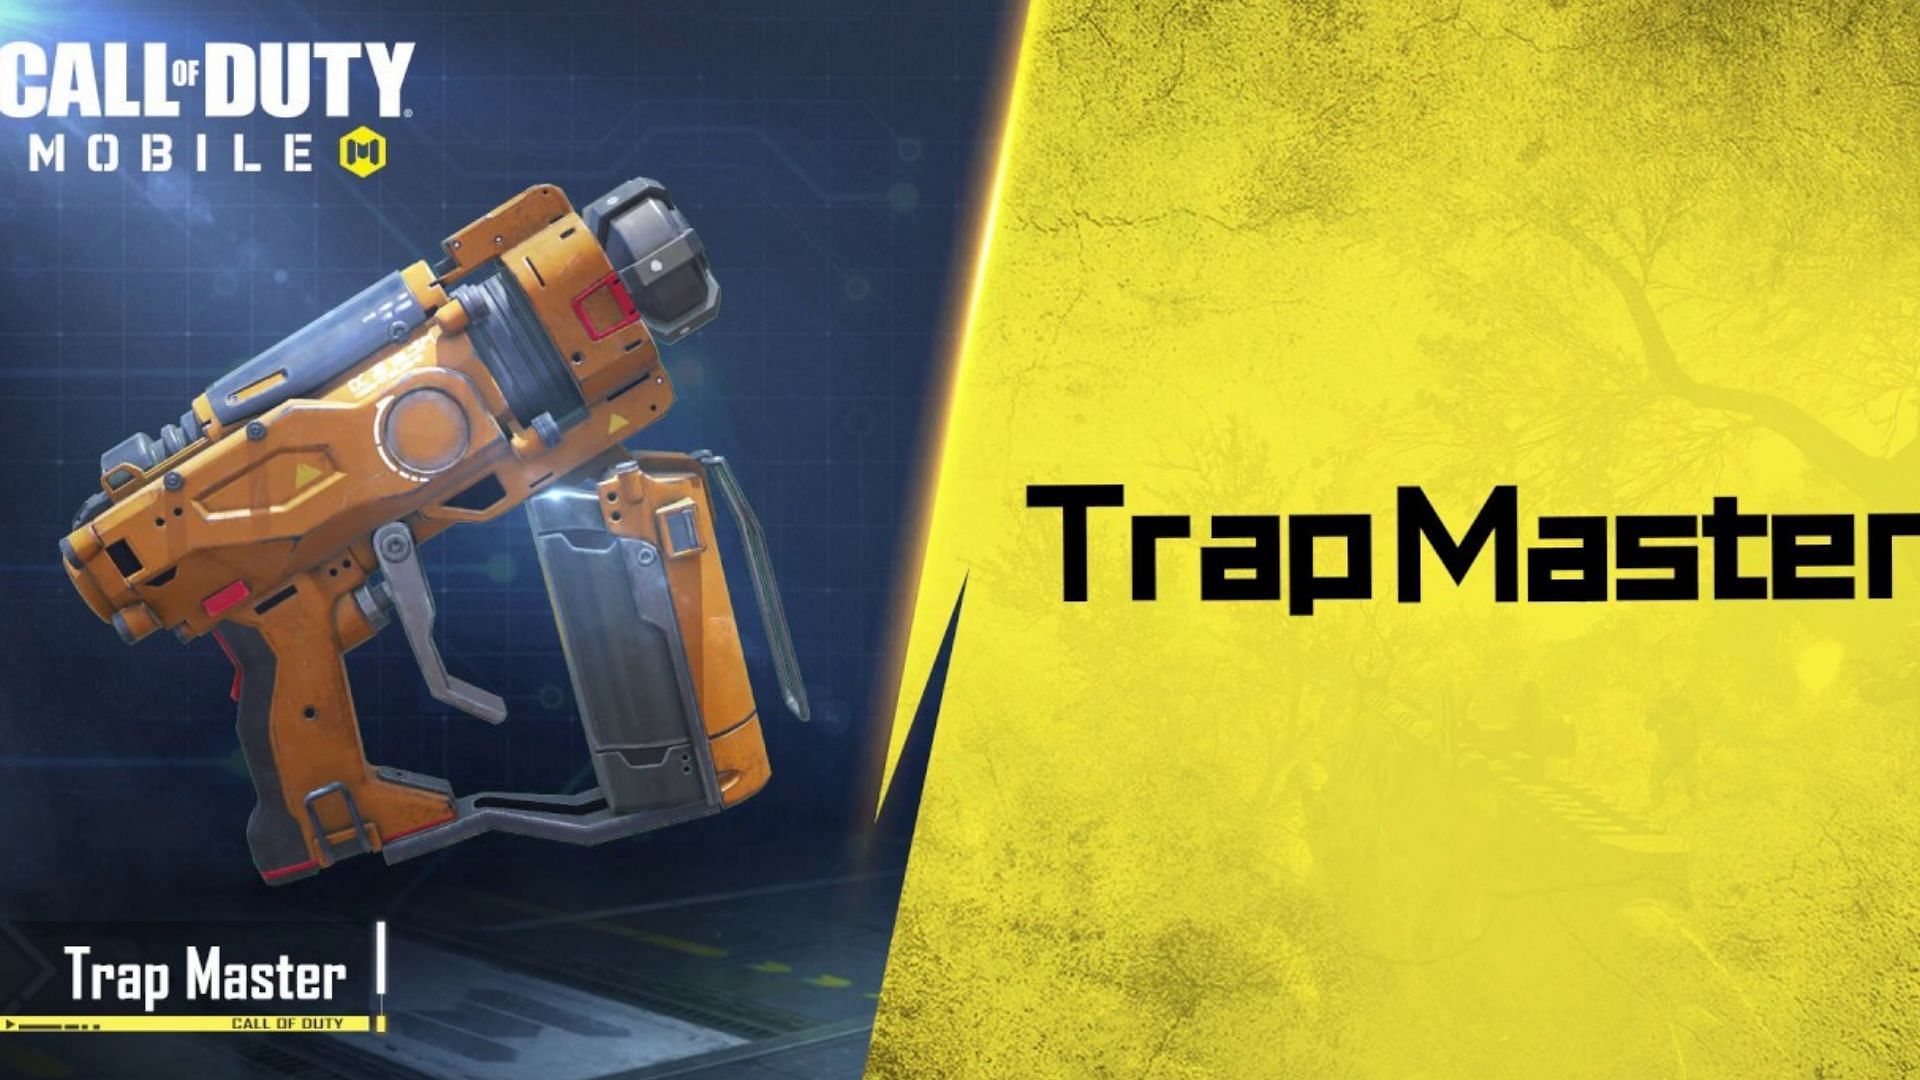 The Trap Master class in COD Mobile Battle Royale is getting a lot of significant changes, and players can check them out in Season 3 (Image via Activision)